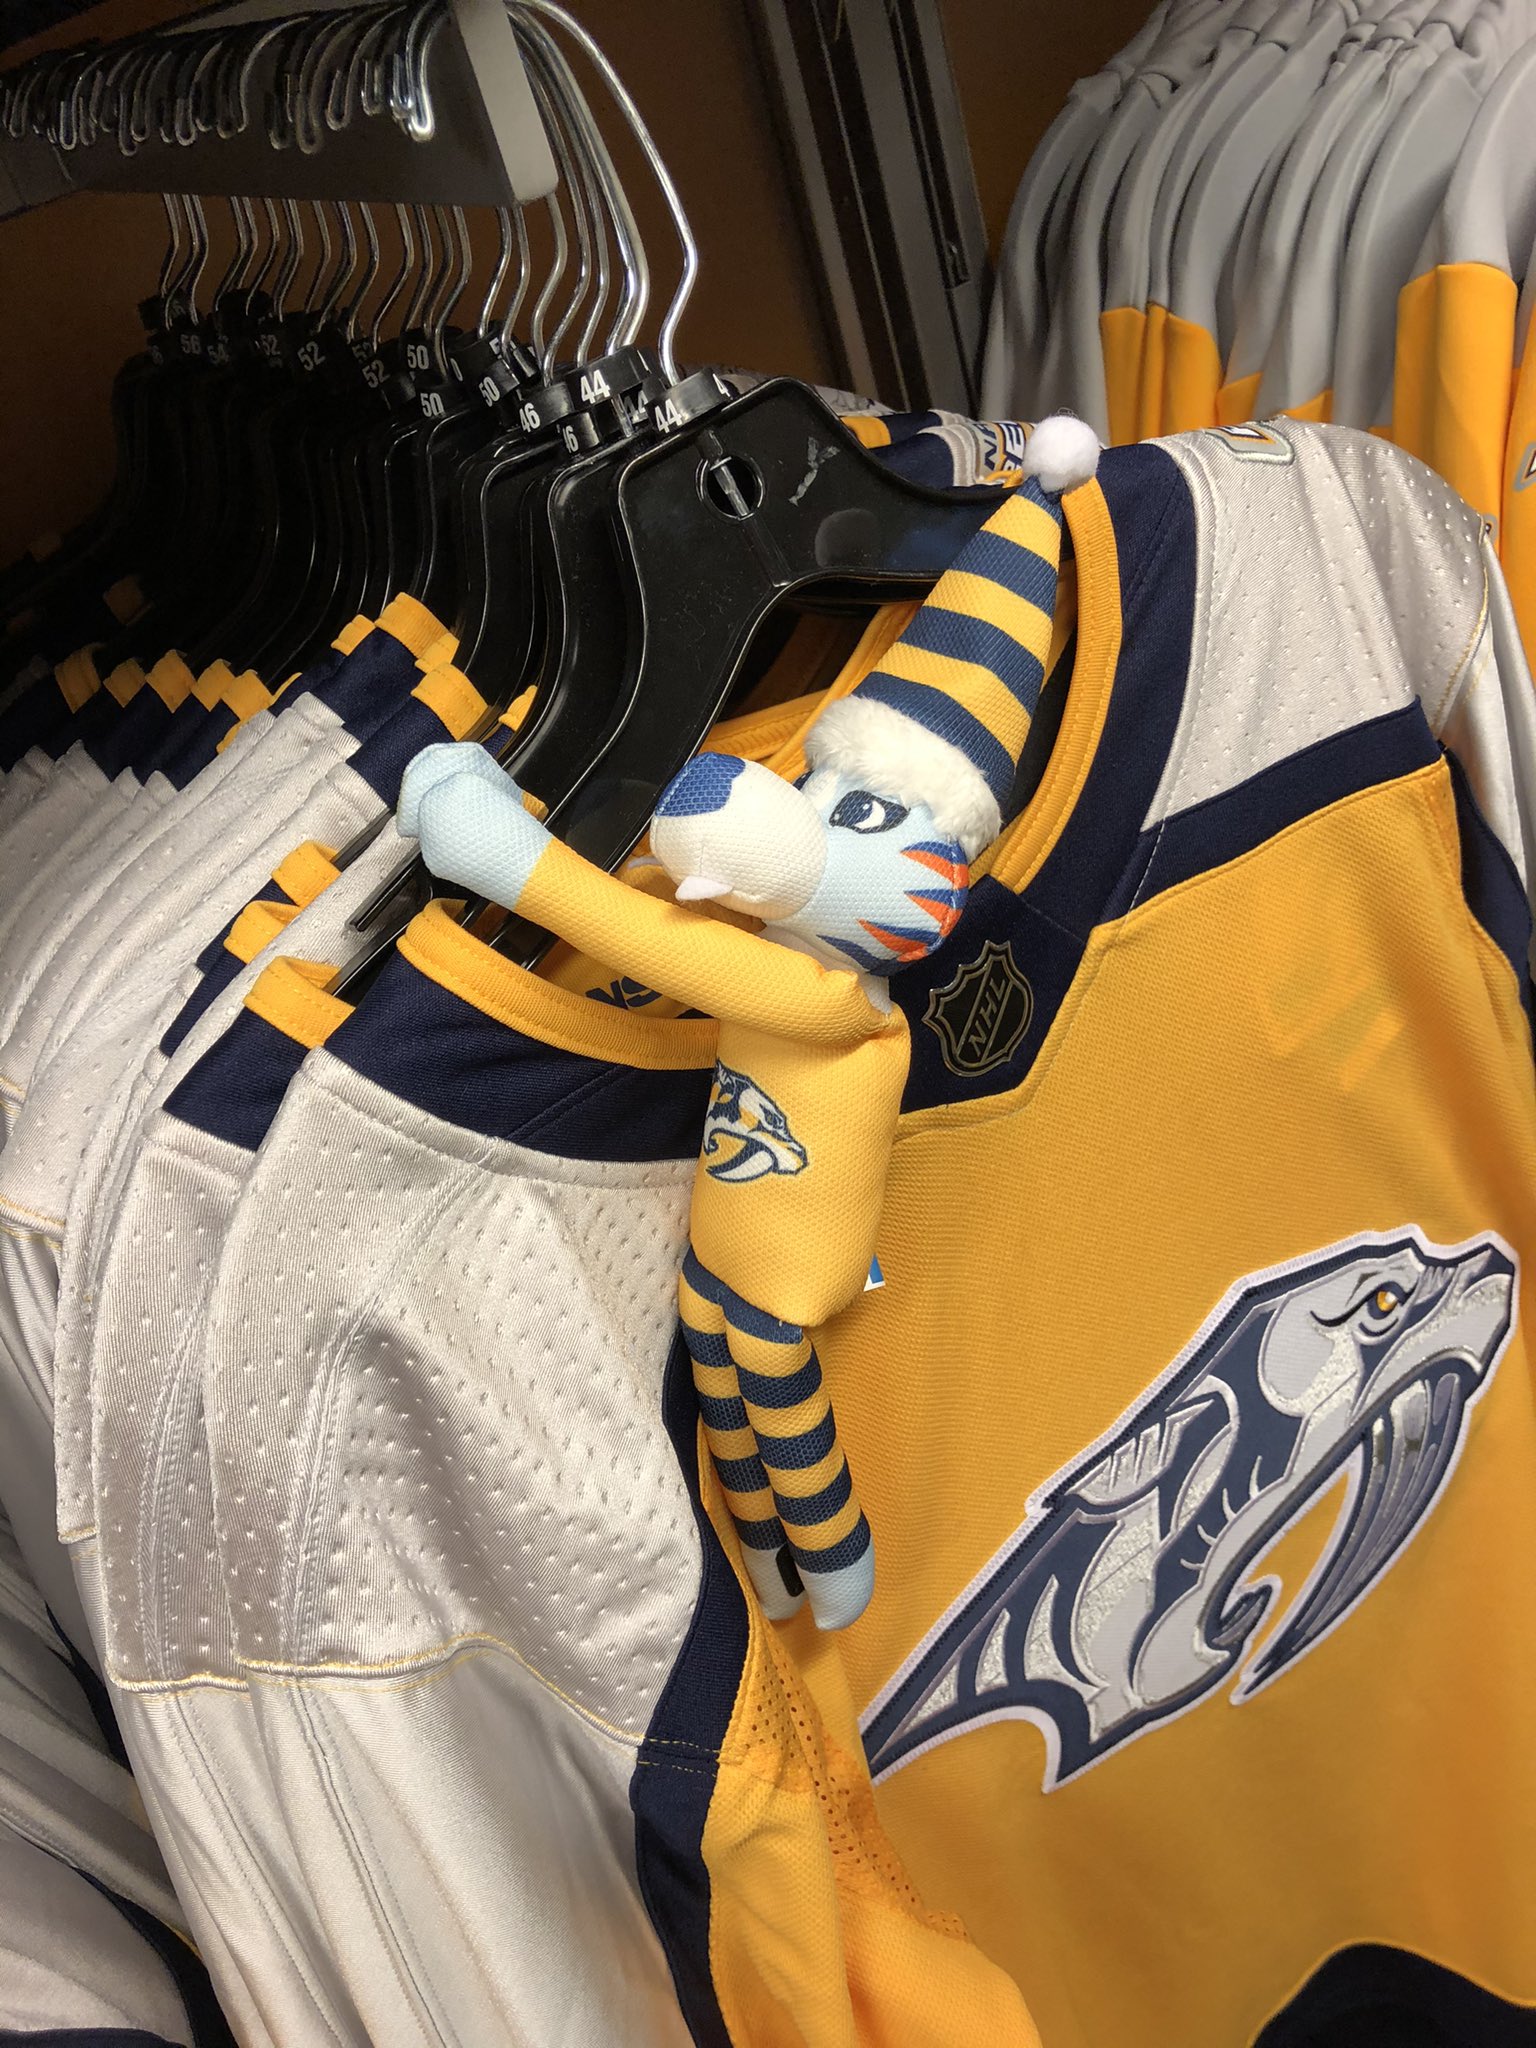 Nashville Predators on X: It's Day 8⃣ of @HesWayneD's 12 Days of Christmas  and we're giving away a 2022 Reverse Retro jersey signed by Roman Josi!  PLUS our friends at @kroger threw